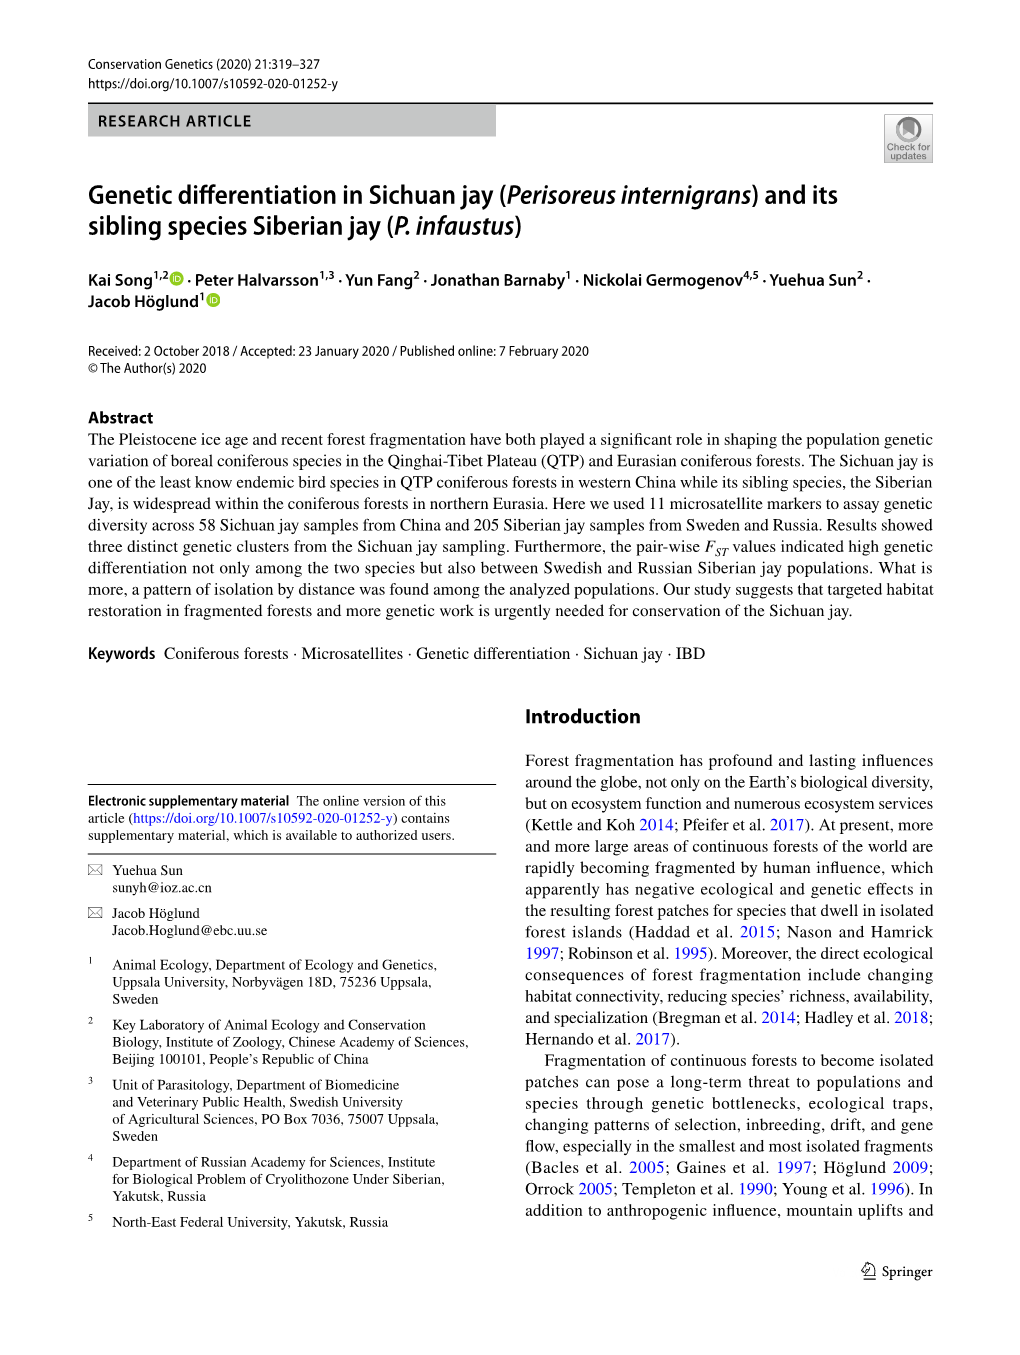 Genetic Differentiation in Sichuan Jay (Perisoreus Internigrans) and Its Sibling Species Siberian Jay (P. Infaustus)